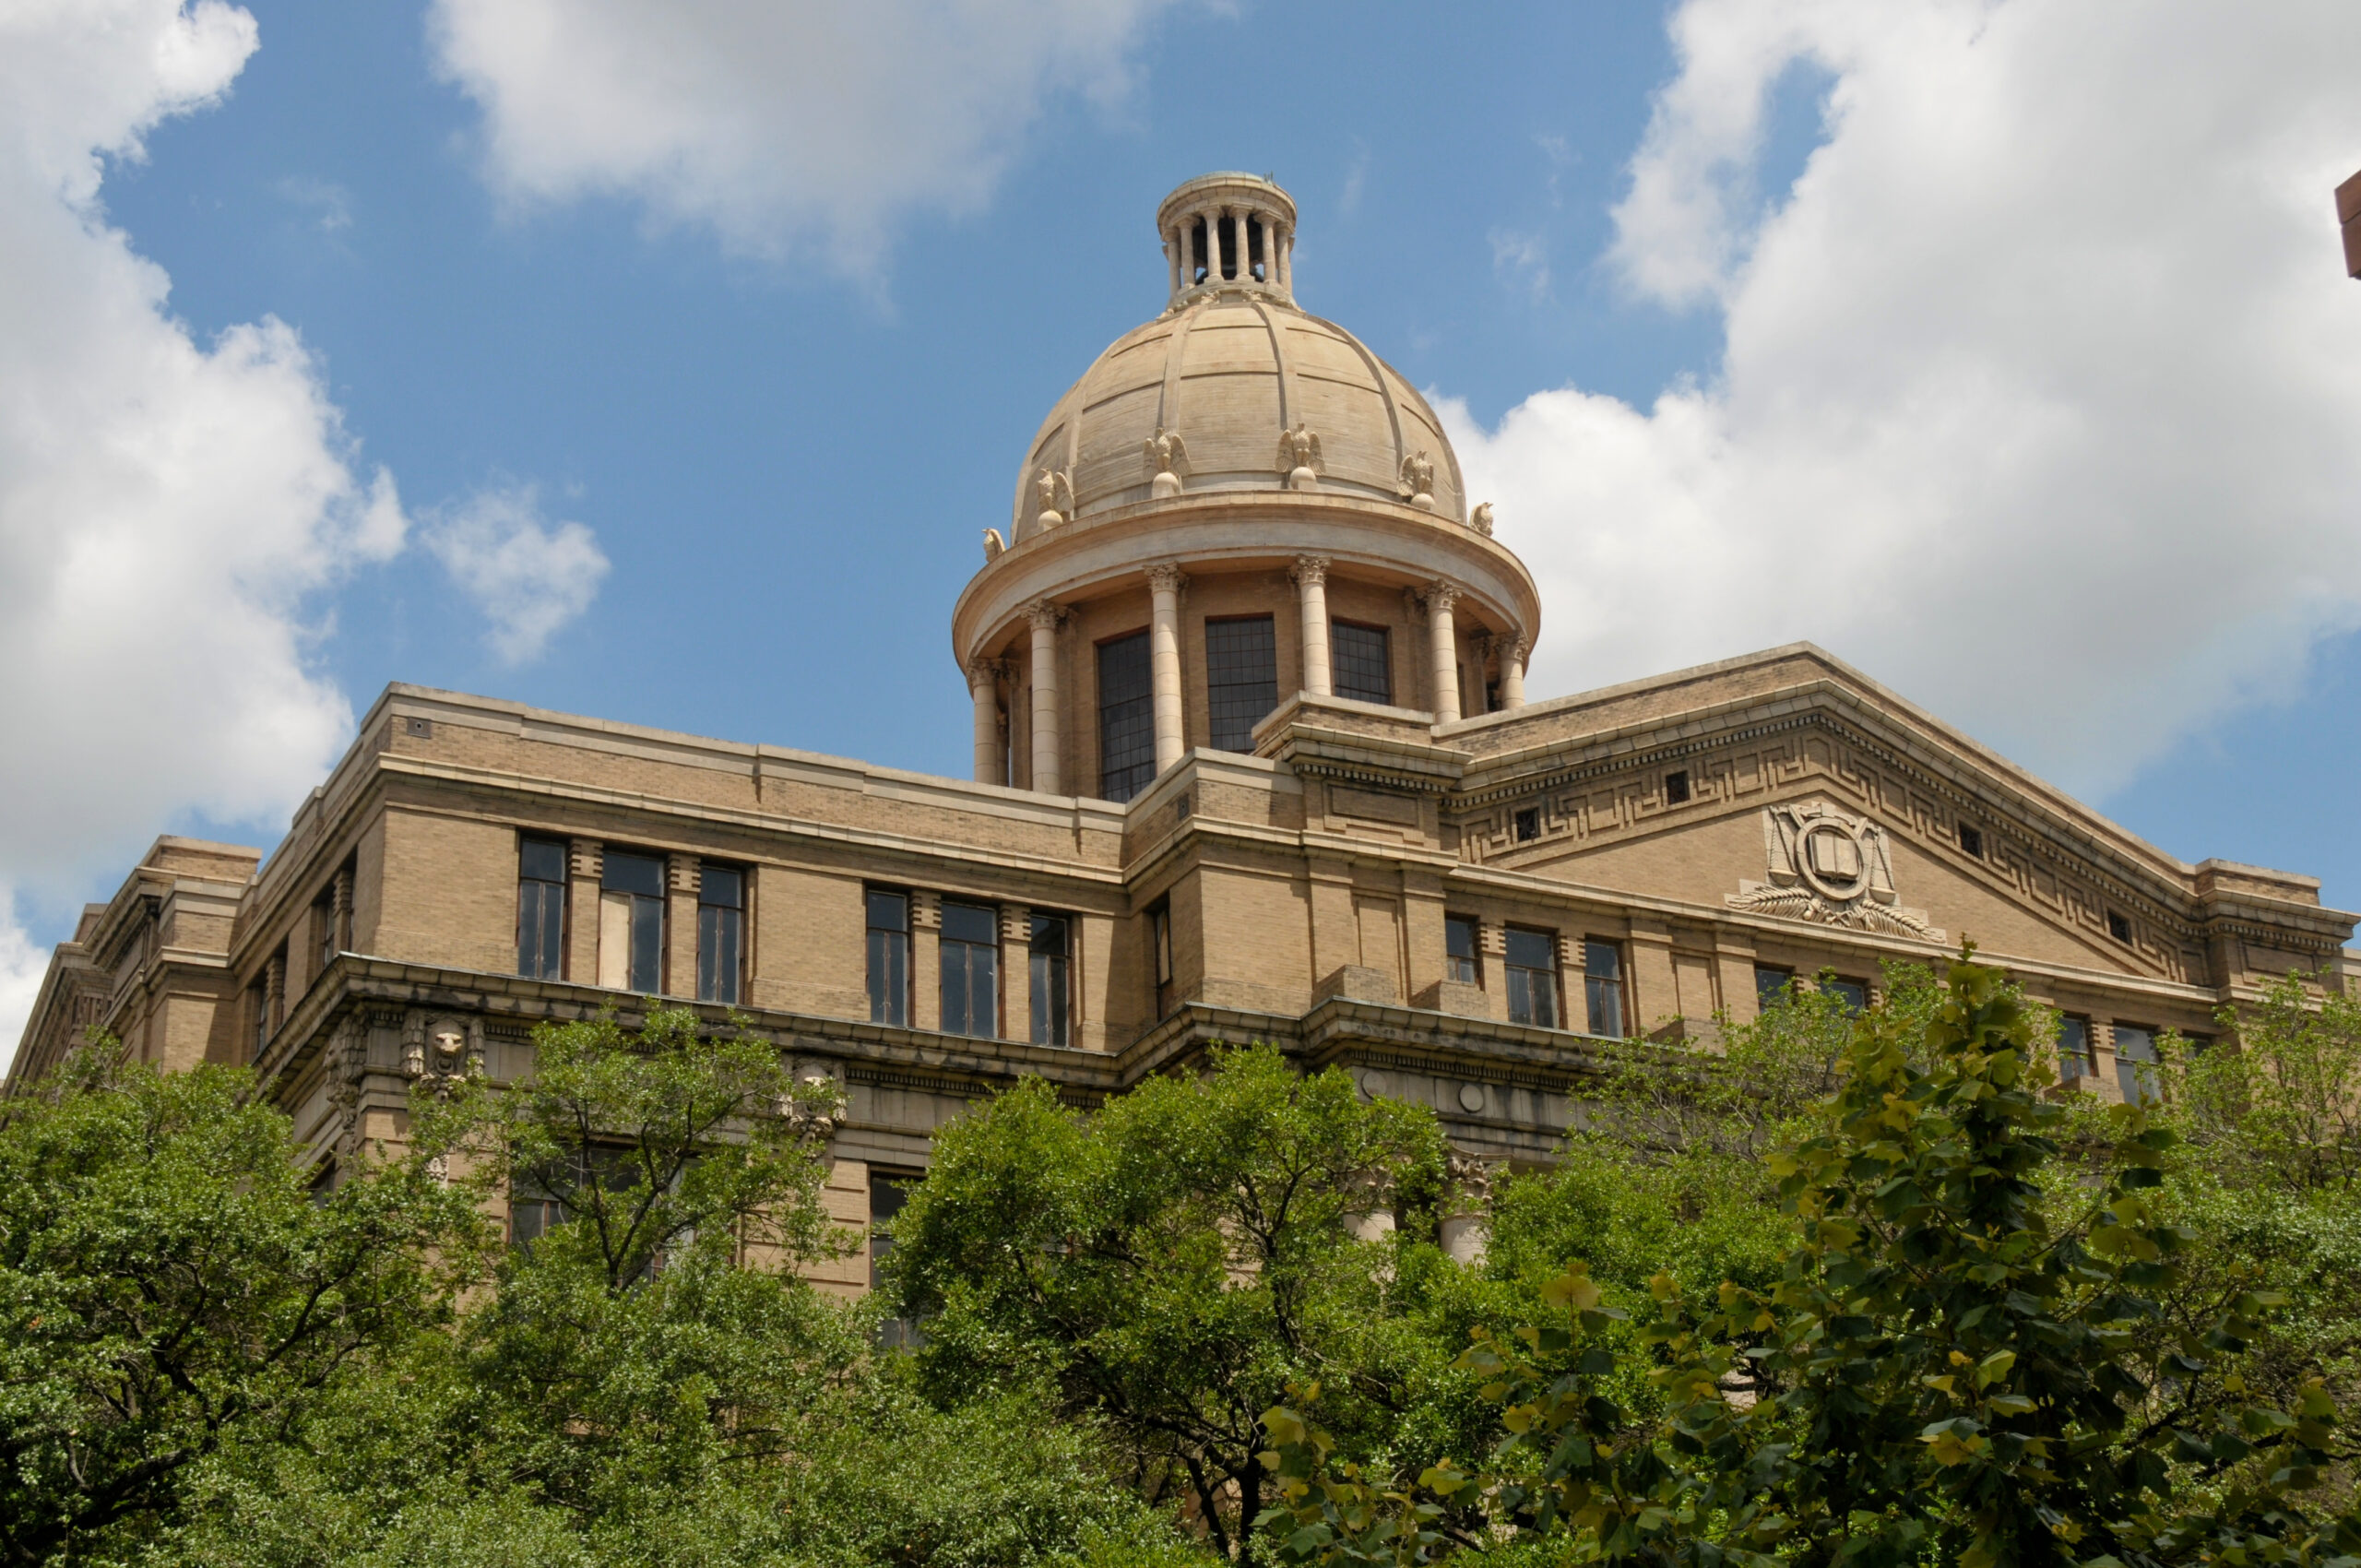 Harris County Courthouse in historic district of downtown Houston, Texas.